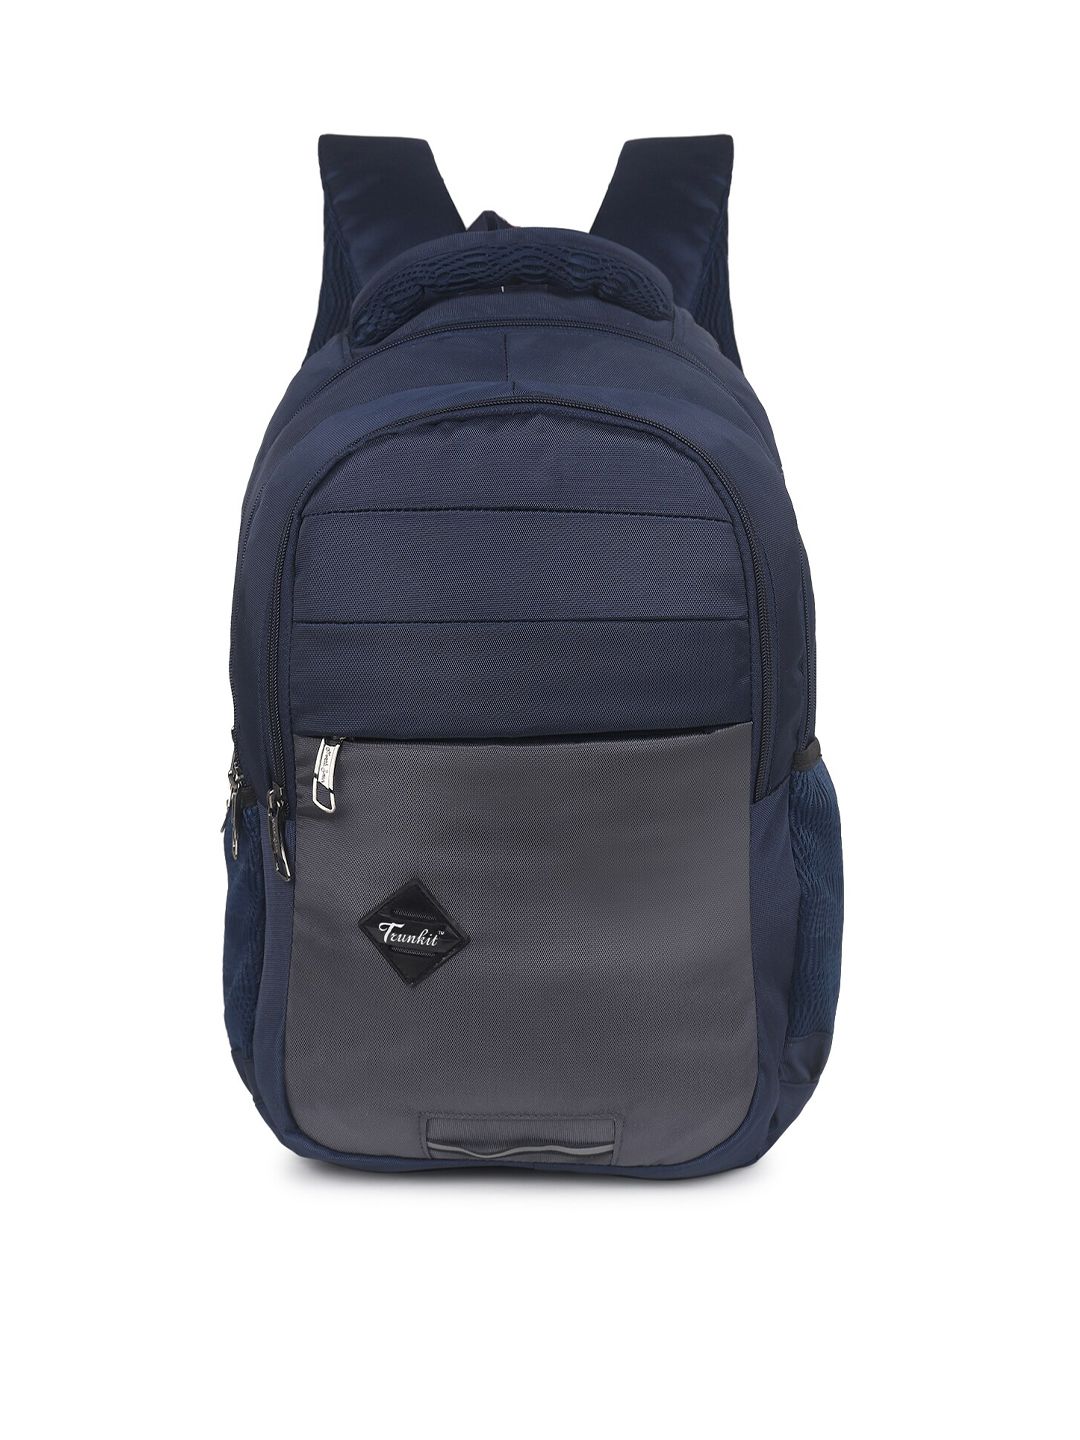 TRUNKIT Unisex Blue Laptop Backpack With Rain Cover Price in India